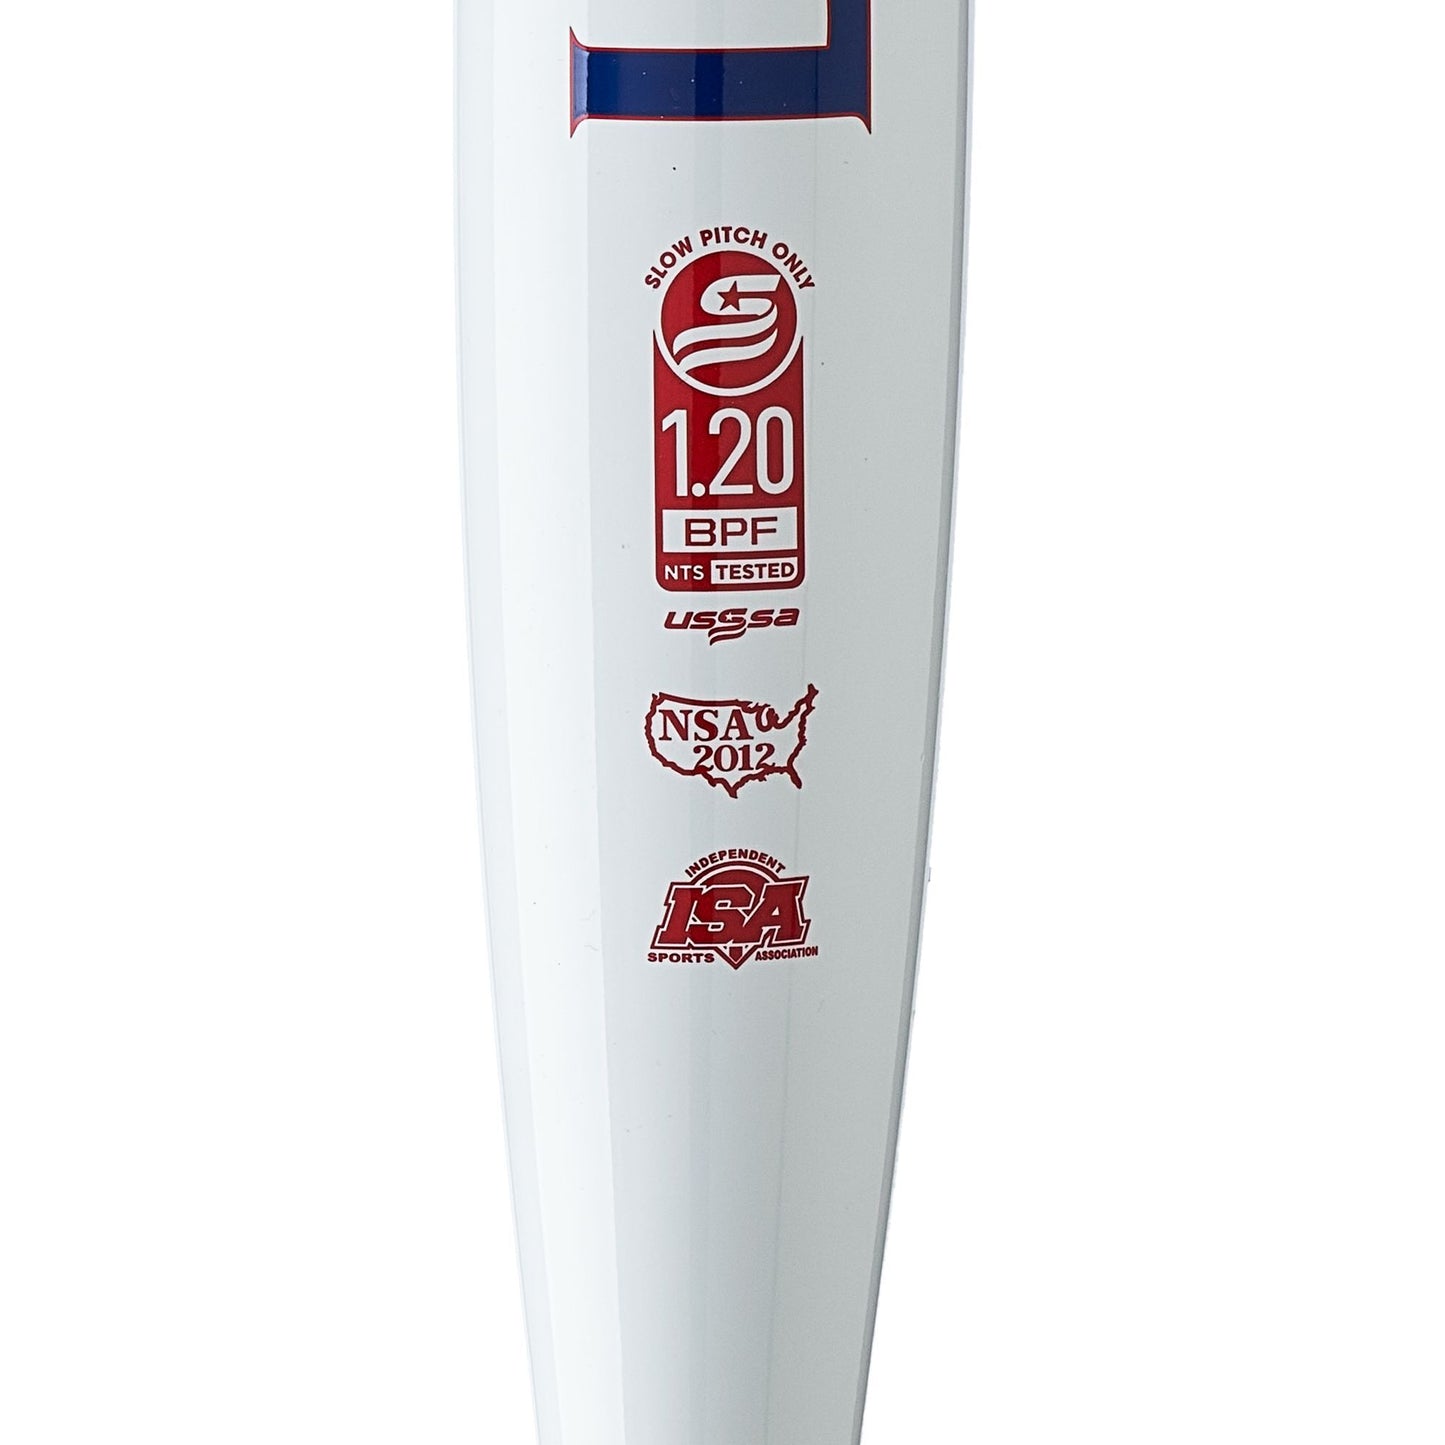 A photo of the Louisville Slugger 2024 Genesis 1 Piece End Load Slo-Pitch Bat - Source Exclusive in colour white with navy blue text picture of the bat specs